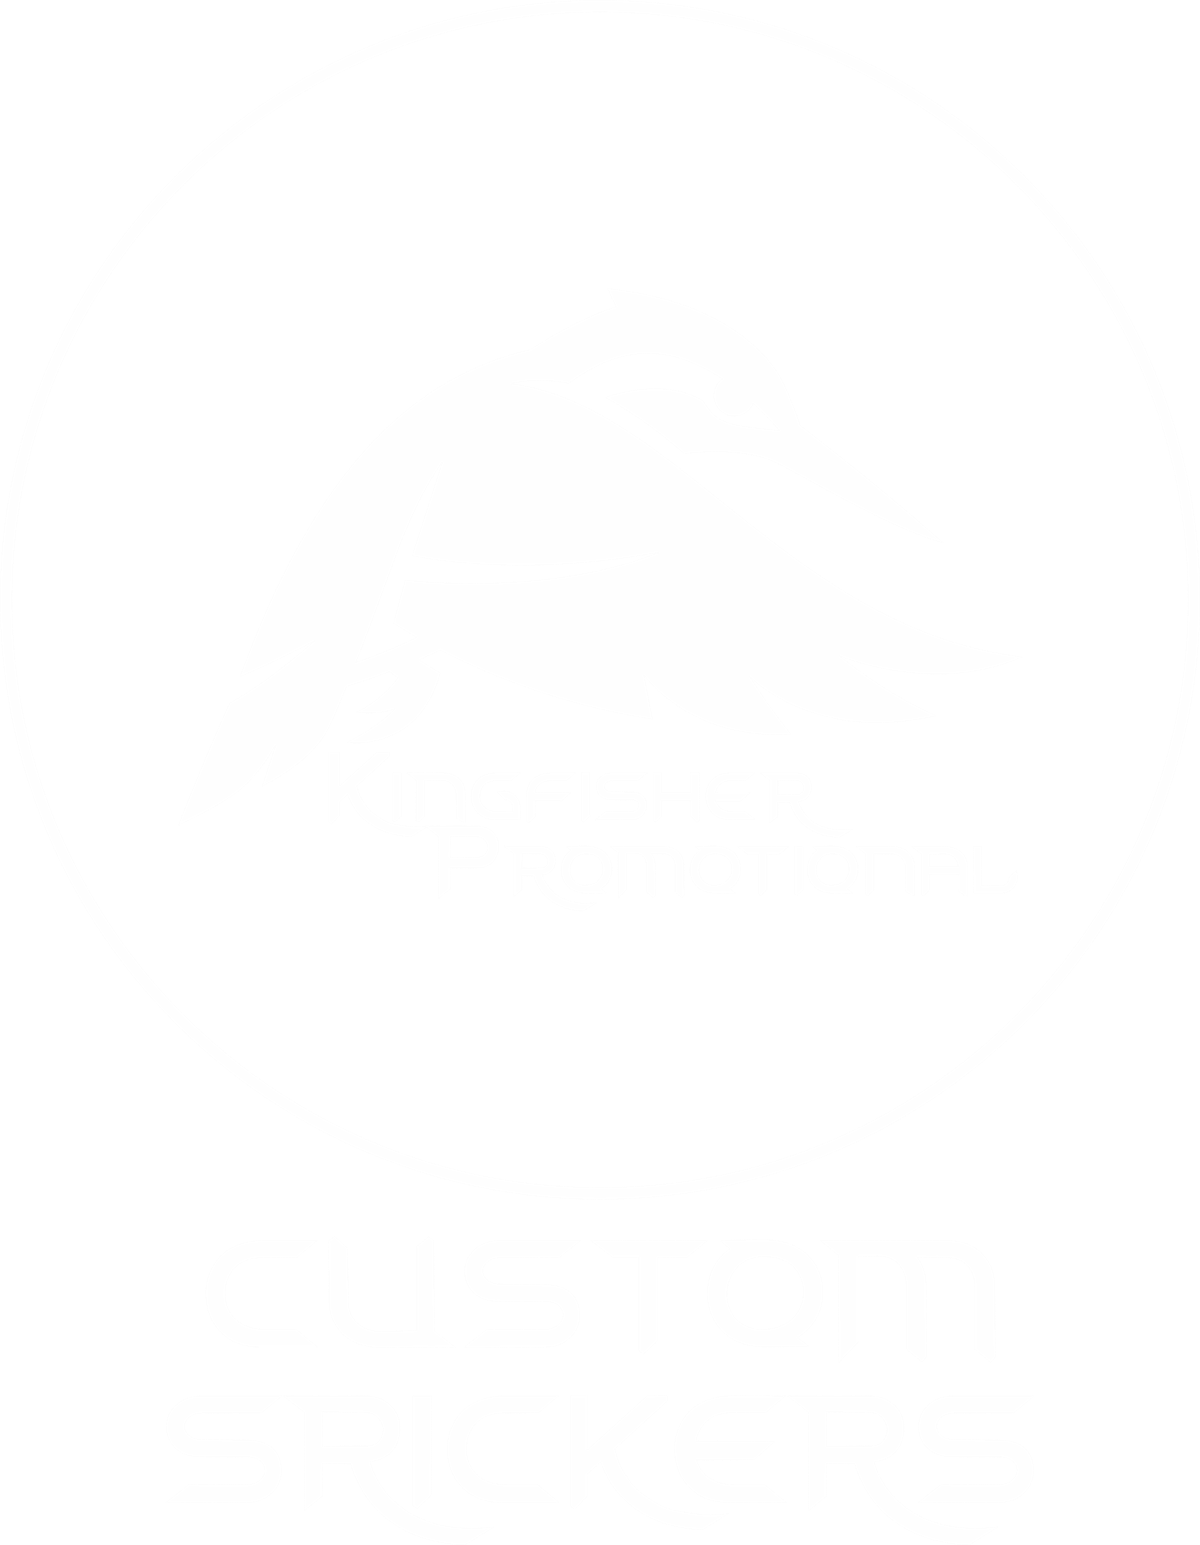 Custom Stickers of the Kingfisher Logo inside a white circle